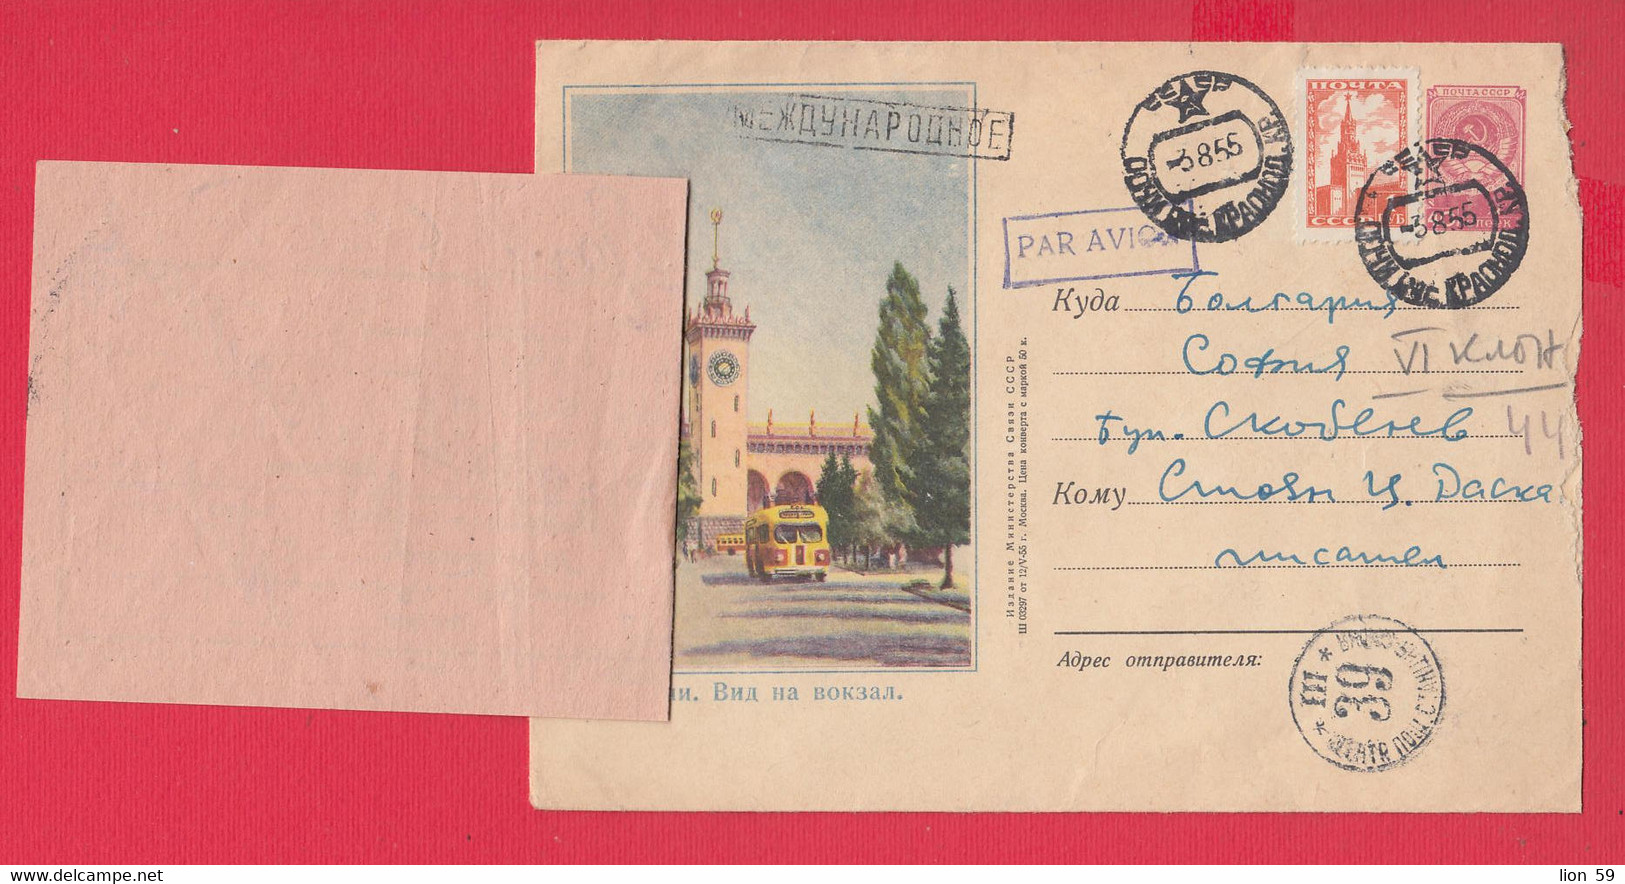 112K262 / Bulgaria 1955 Form 250 - Reference - Does Not Live At This Address ,Russia Stationery, Sochi Railway Station - 1950-59